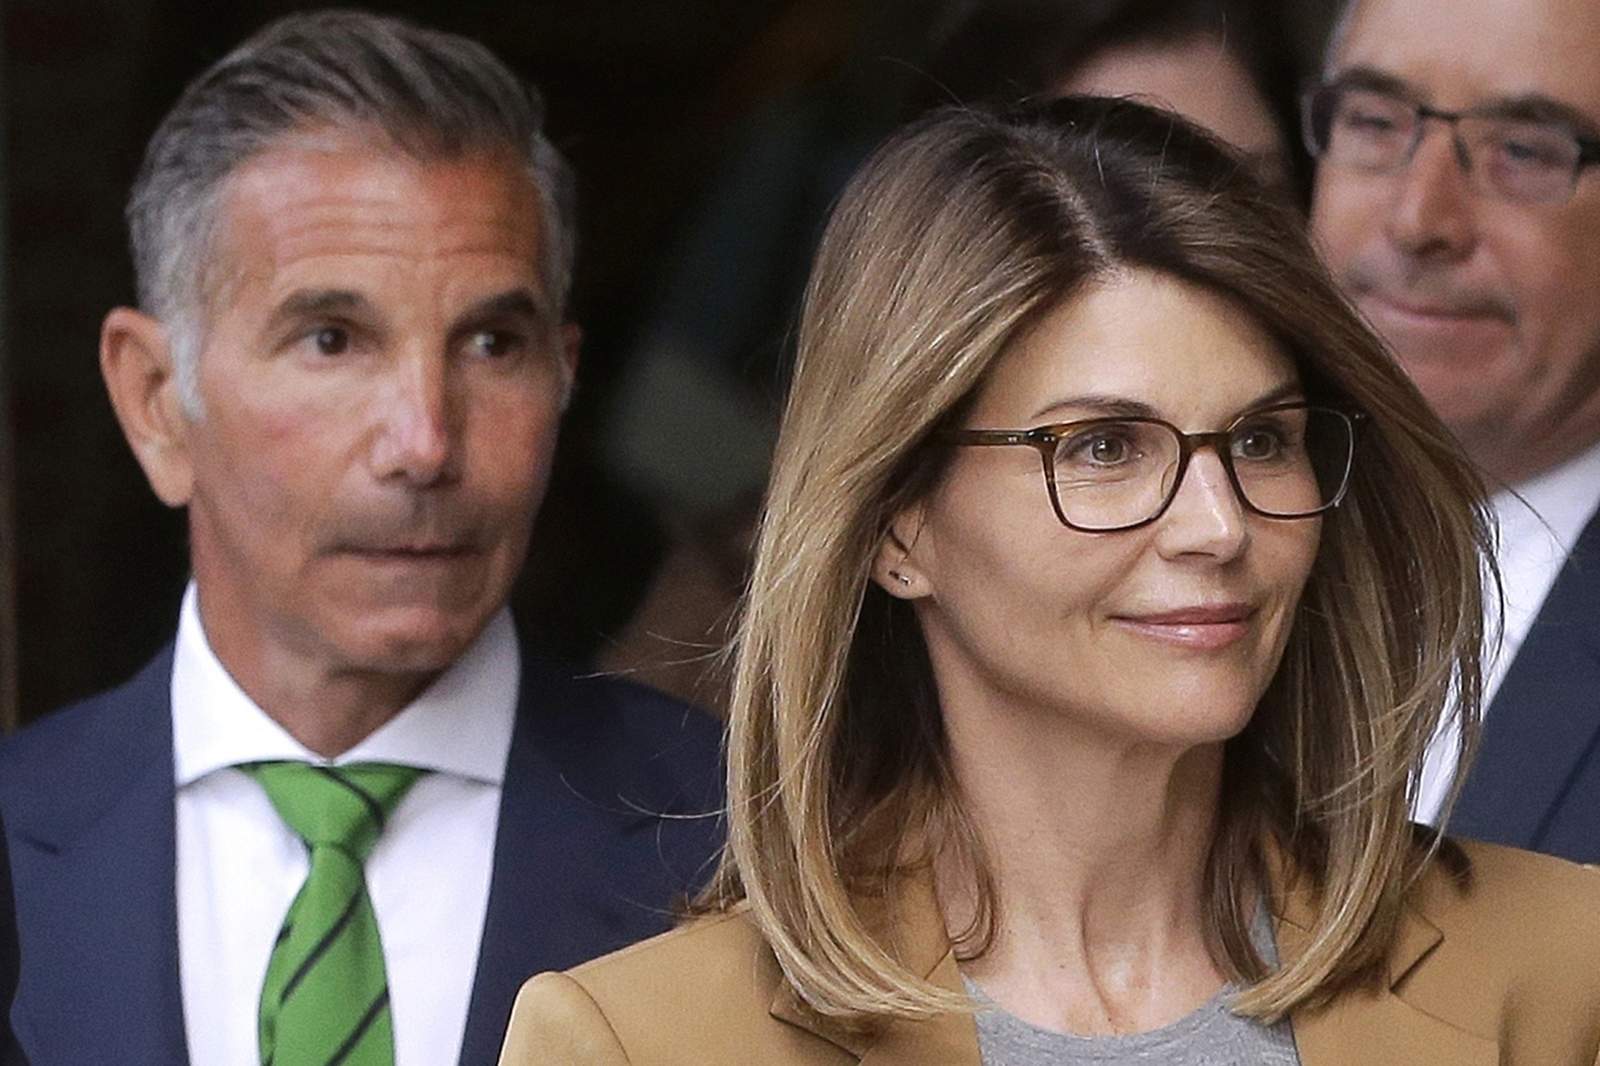 Lori Loughlin, Mossimo Giannulli agree to plead guilty, serve prison time for college scam